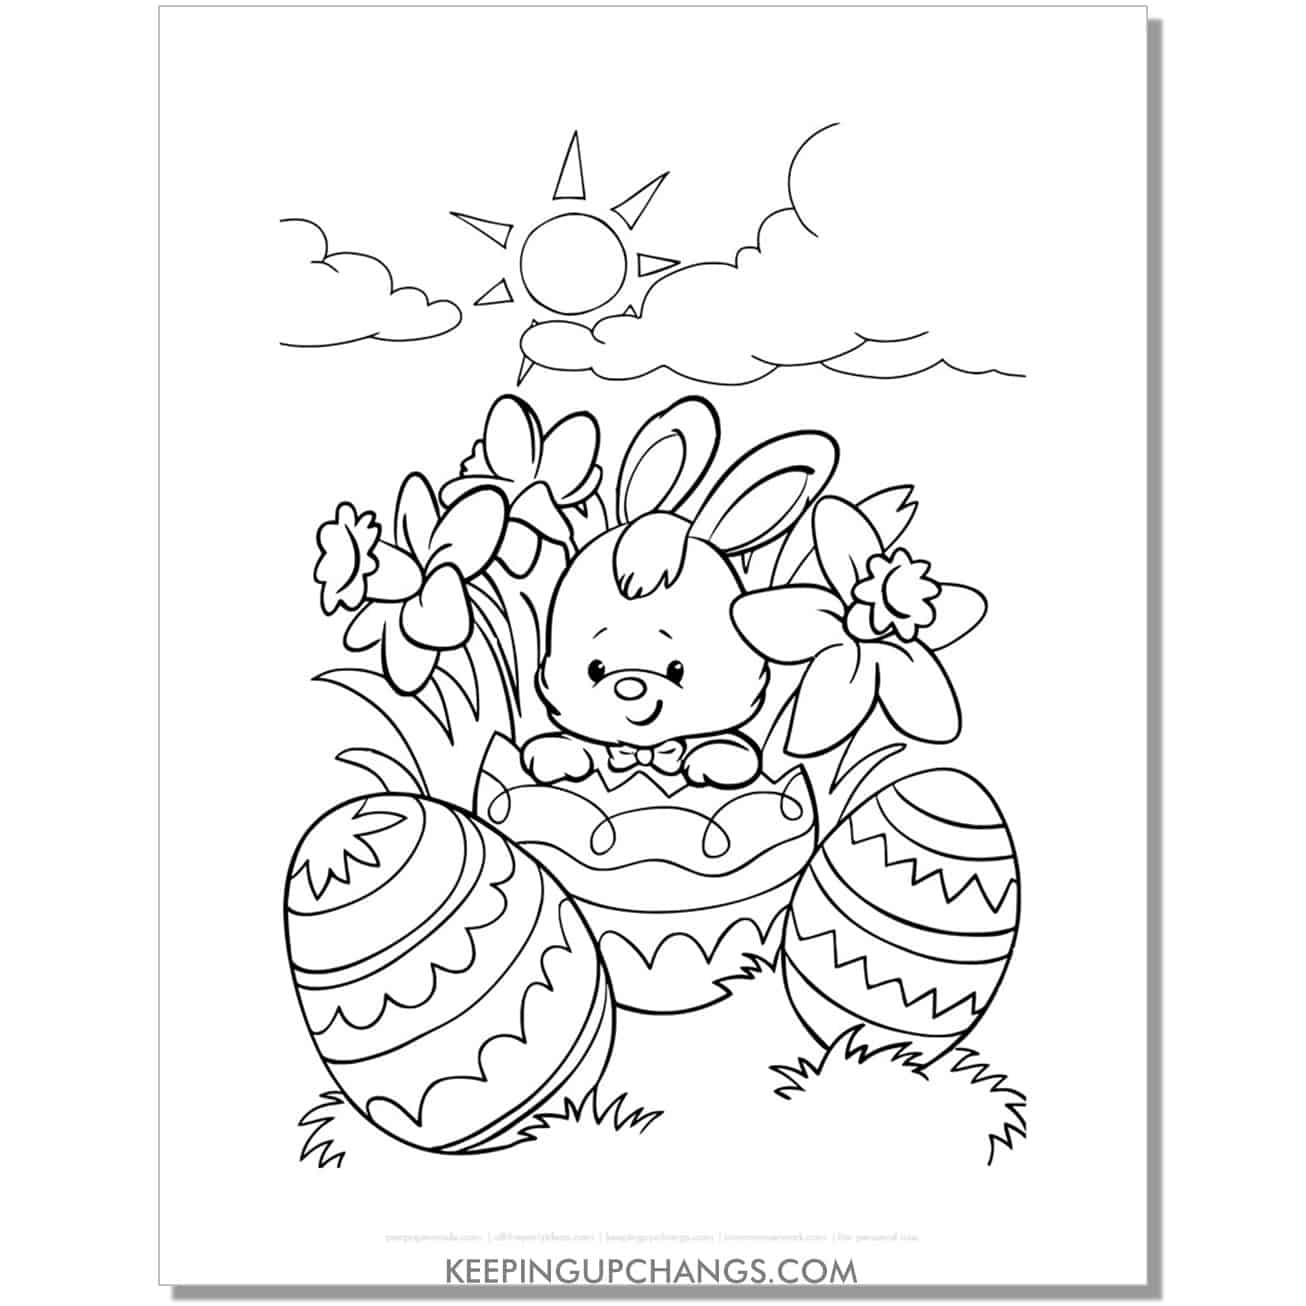 chibi easter bunny with sun, clouds coloring page, sheet